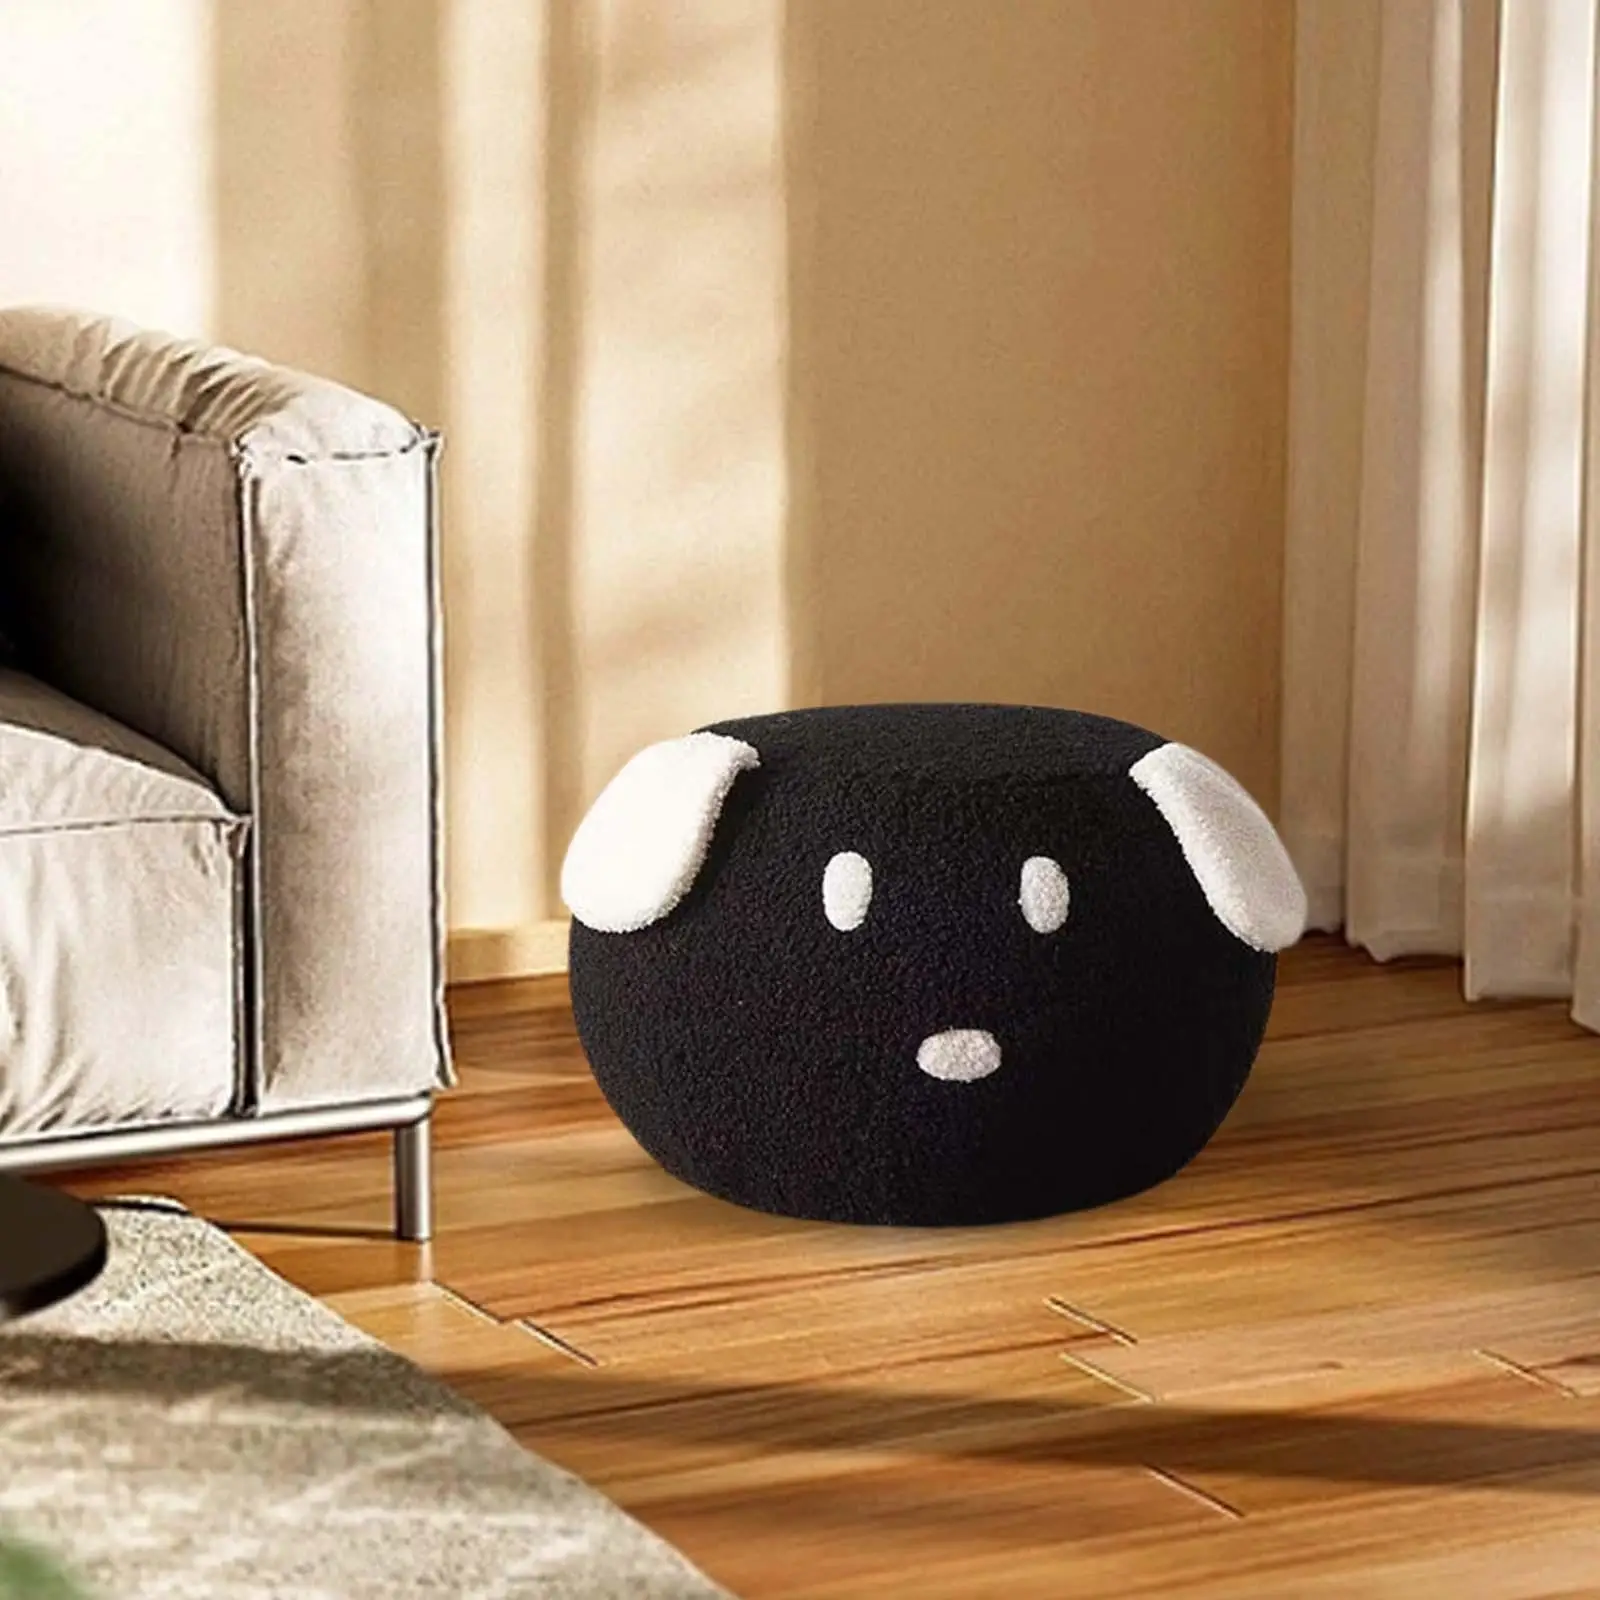 Cute Animal Footstools Decorative Portable Multifunctional Footstool Ottoman for Office Entryway Living Room Bedroom Gift